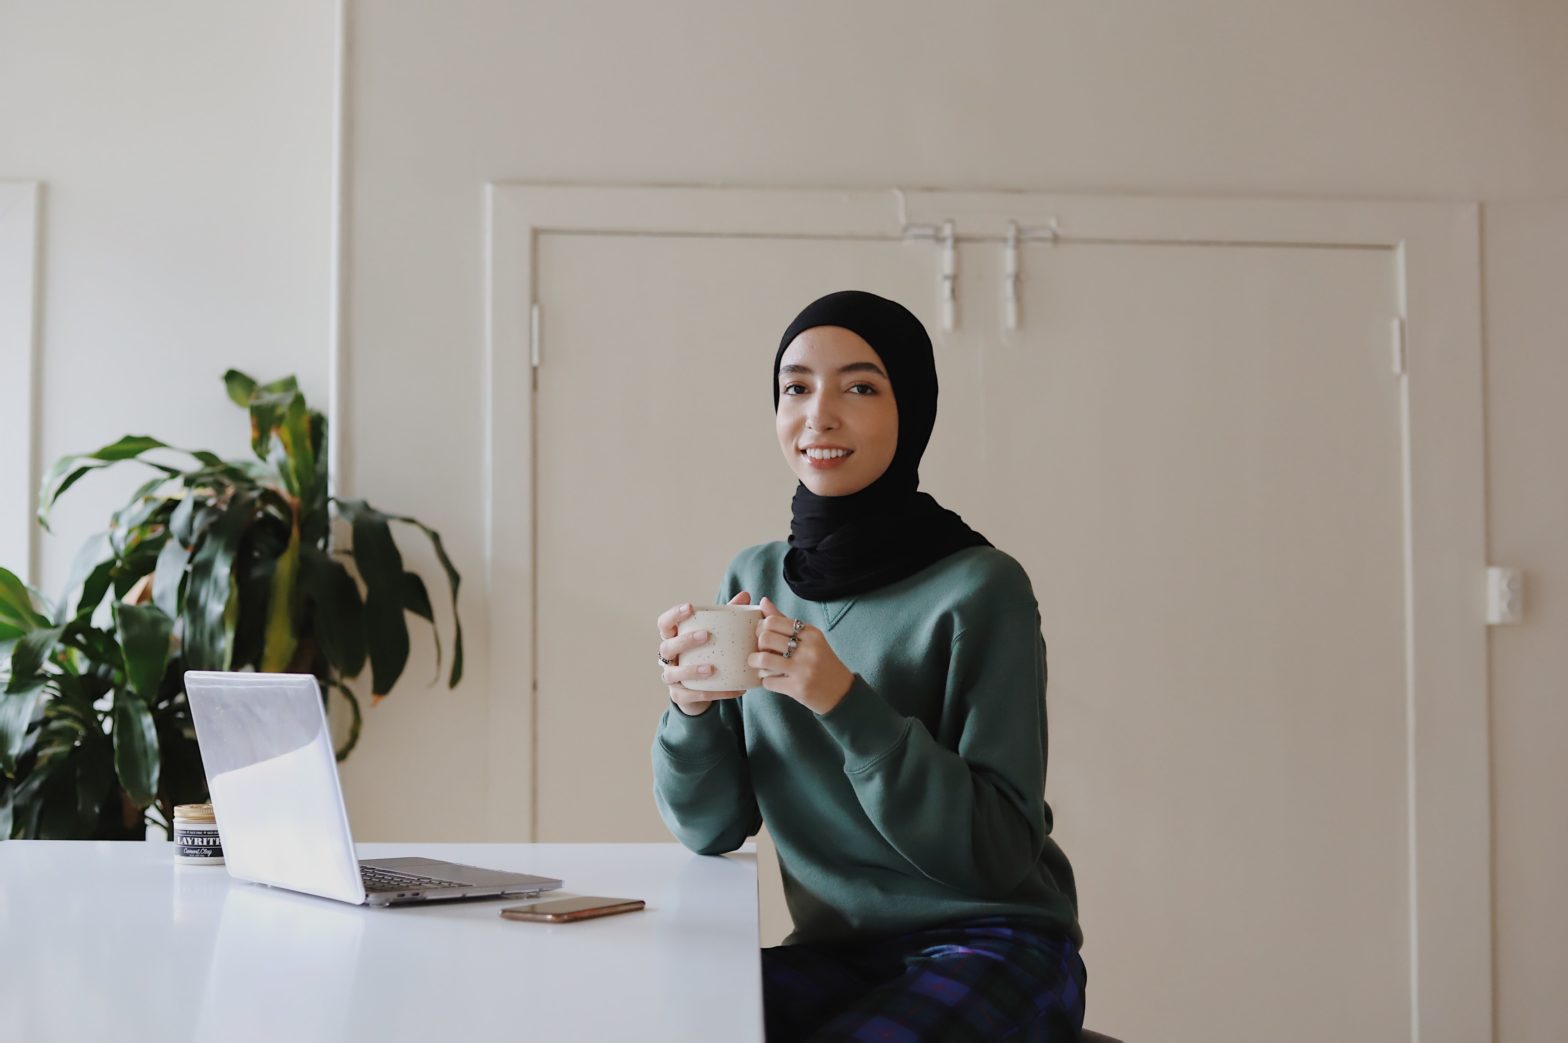 A young woman in a green sweater and a black hijab holding a mug and smiling